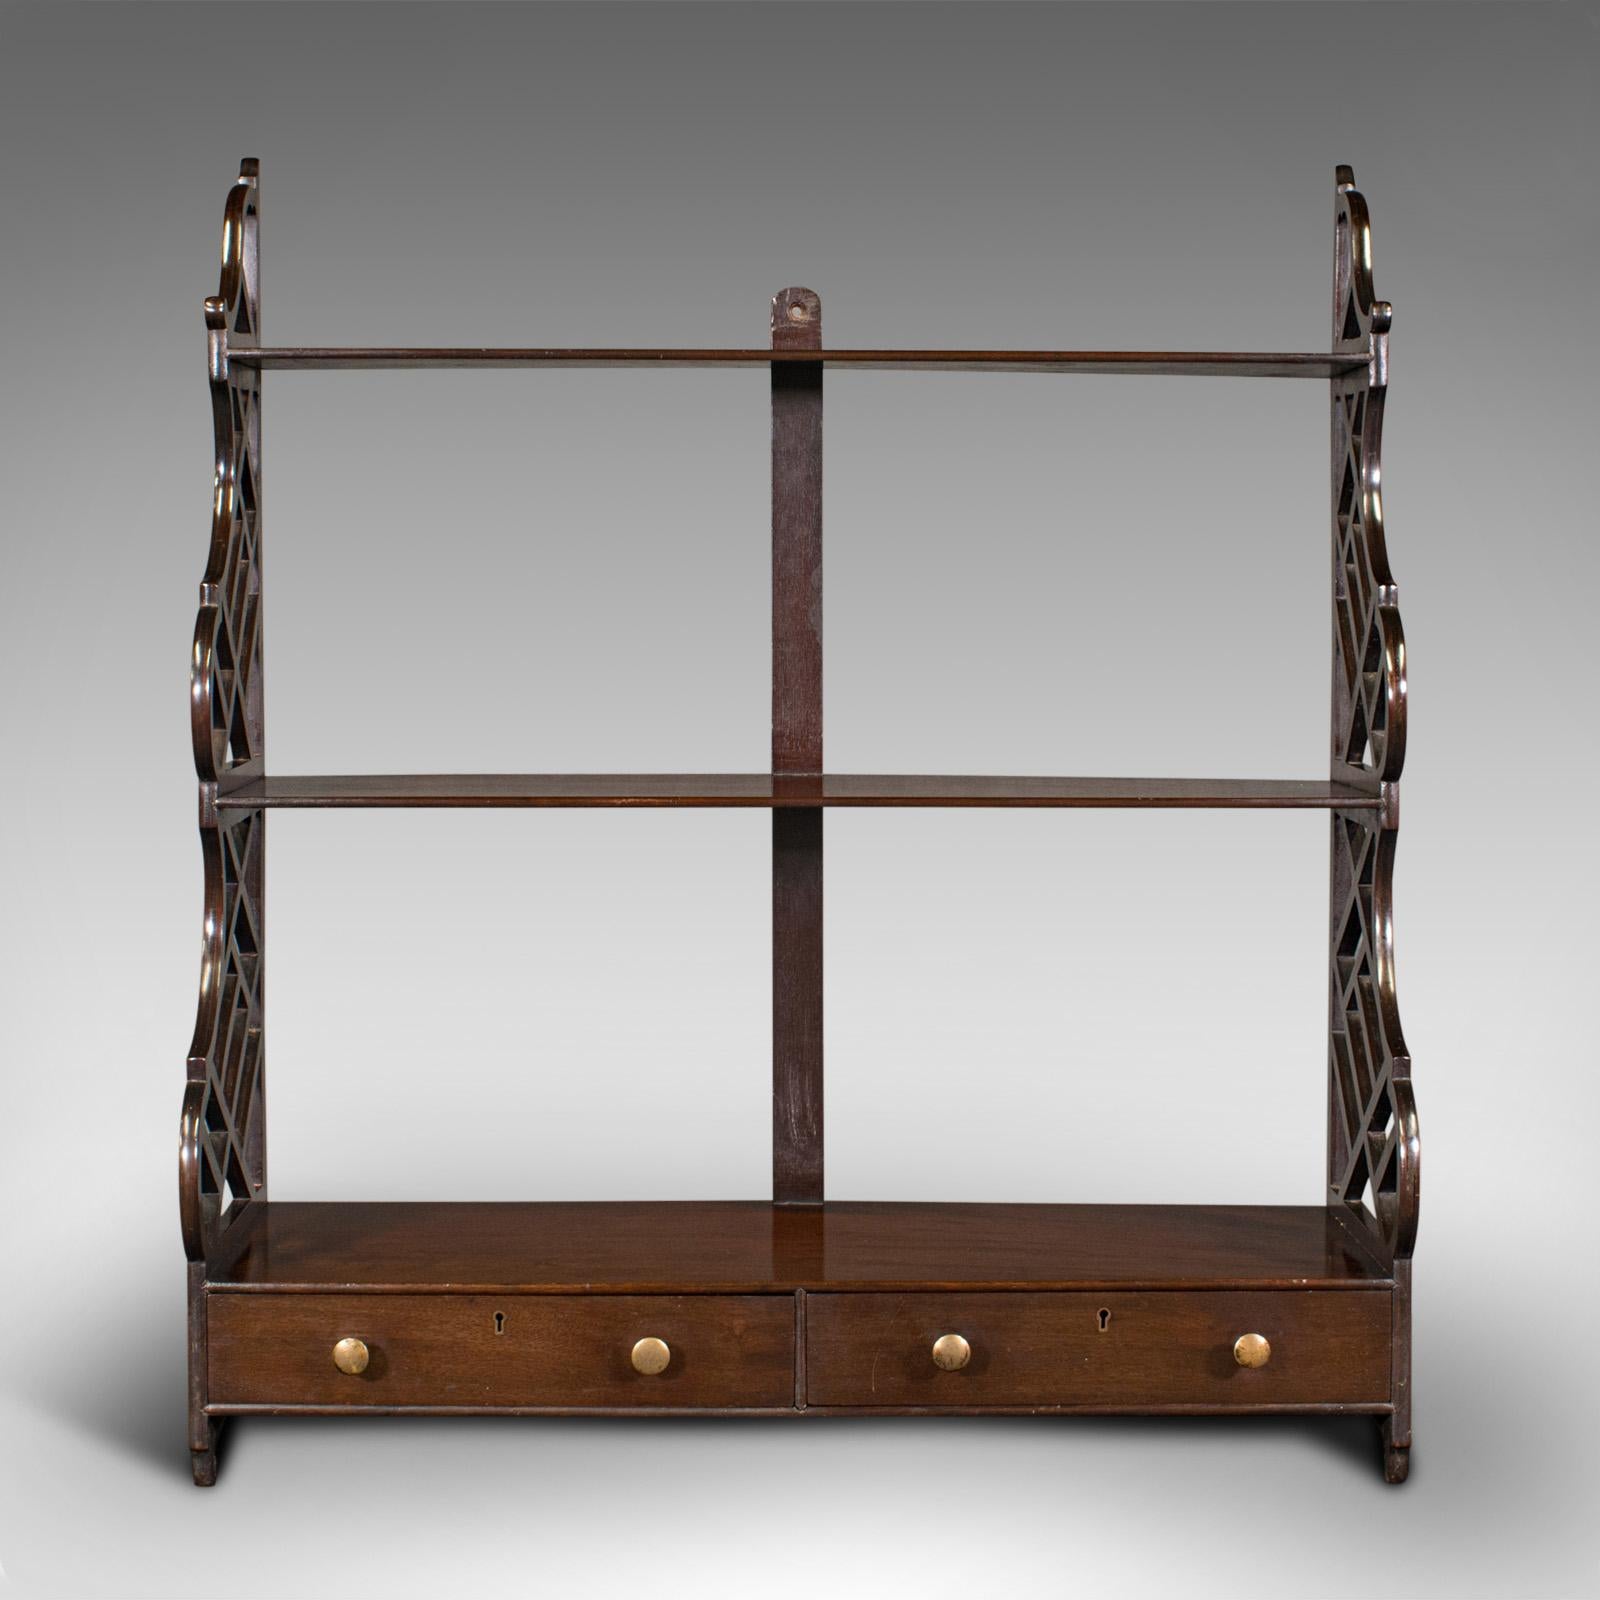 This is an antique mounted whatnot. An English, mahogany wall shelf with Chinoiserie taste, dating to the late Victorian period, circa 1900.

Attractive wall mounted display shelves with distinctive finish
Displays a desirable aged patina and in